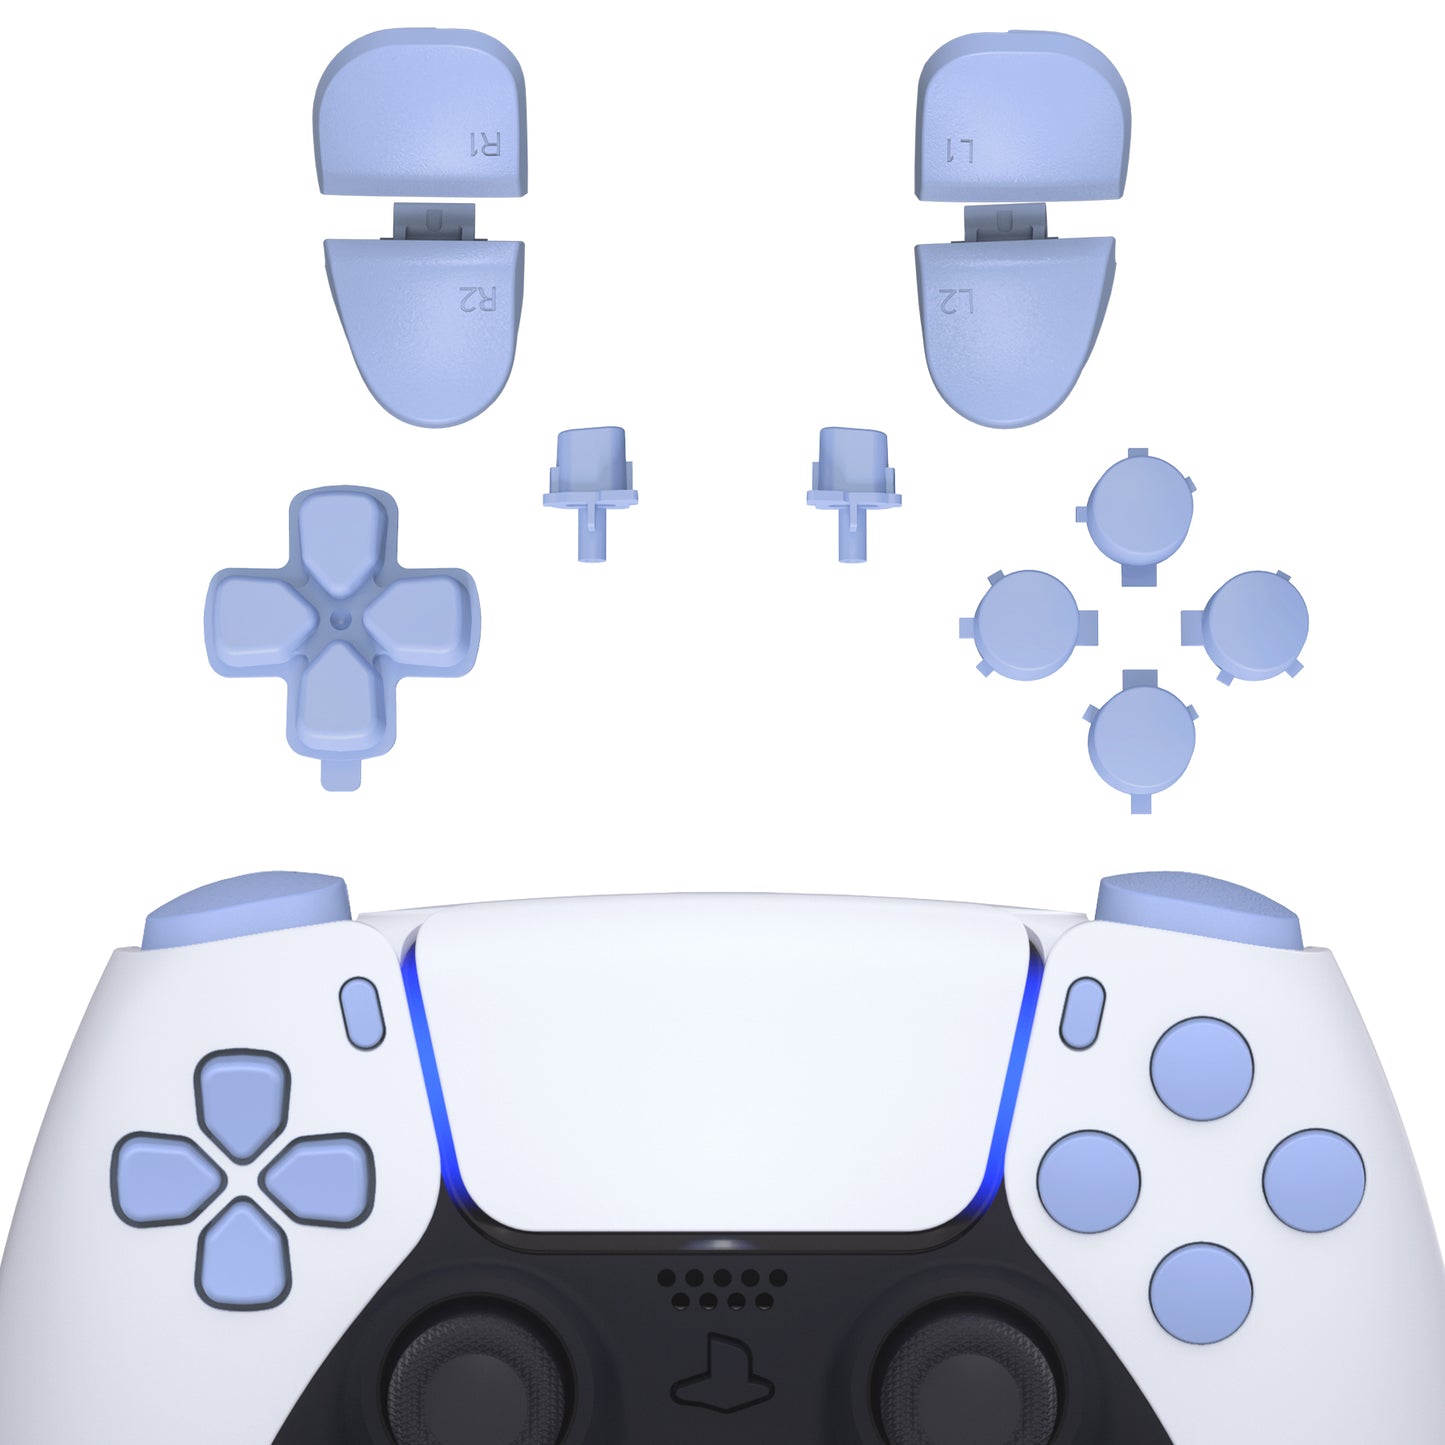 eXtremeRate Retail Replacement D-pad R1 L1 R2 L2 Triggers Share Options Face Buttons, Light Violet Full Set Buttons Compatible with ps5 Controller BDM-030 - JPF1015G3